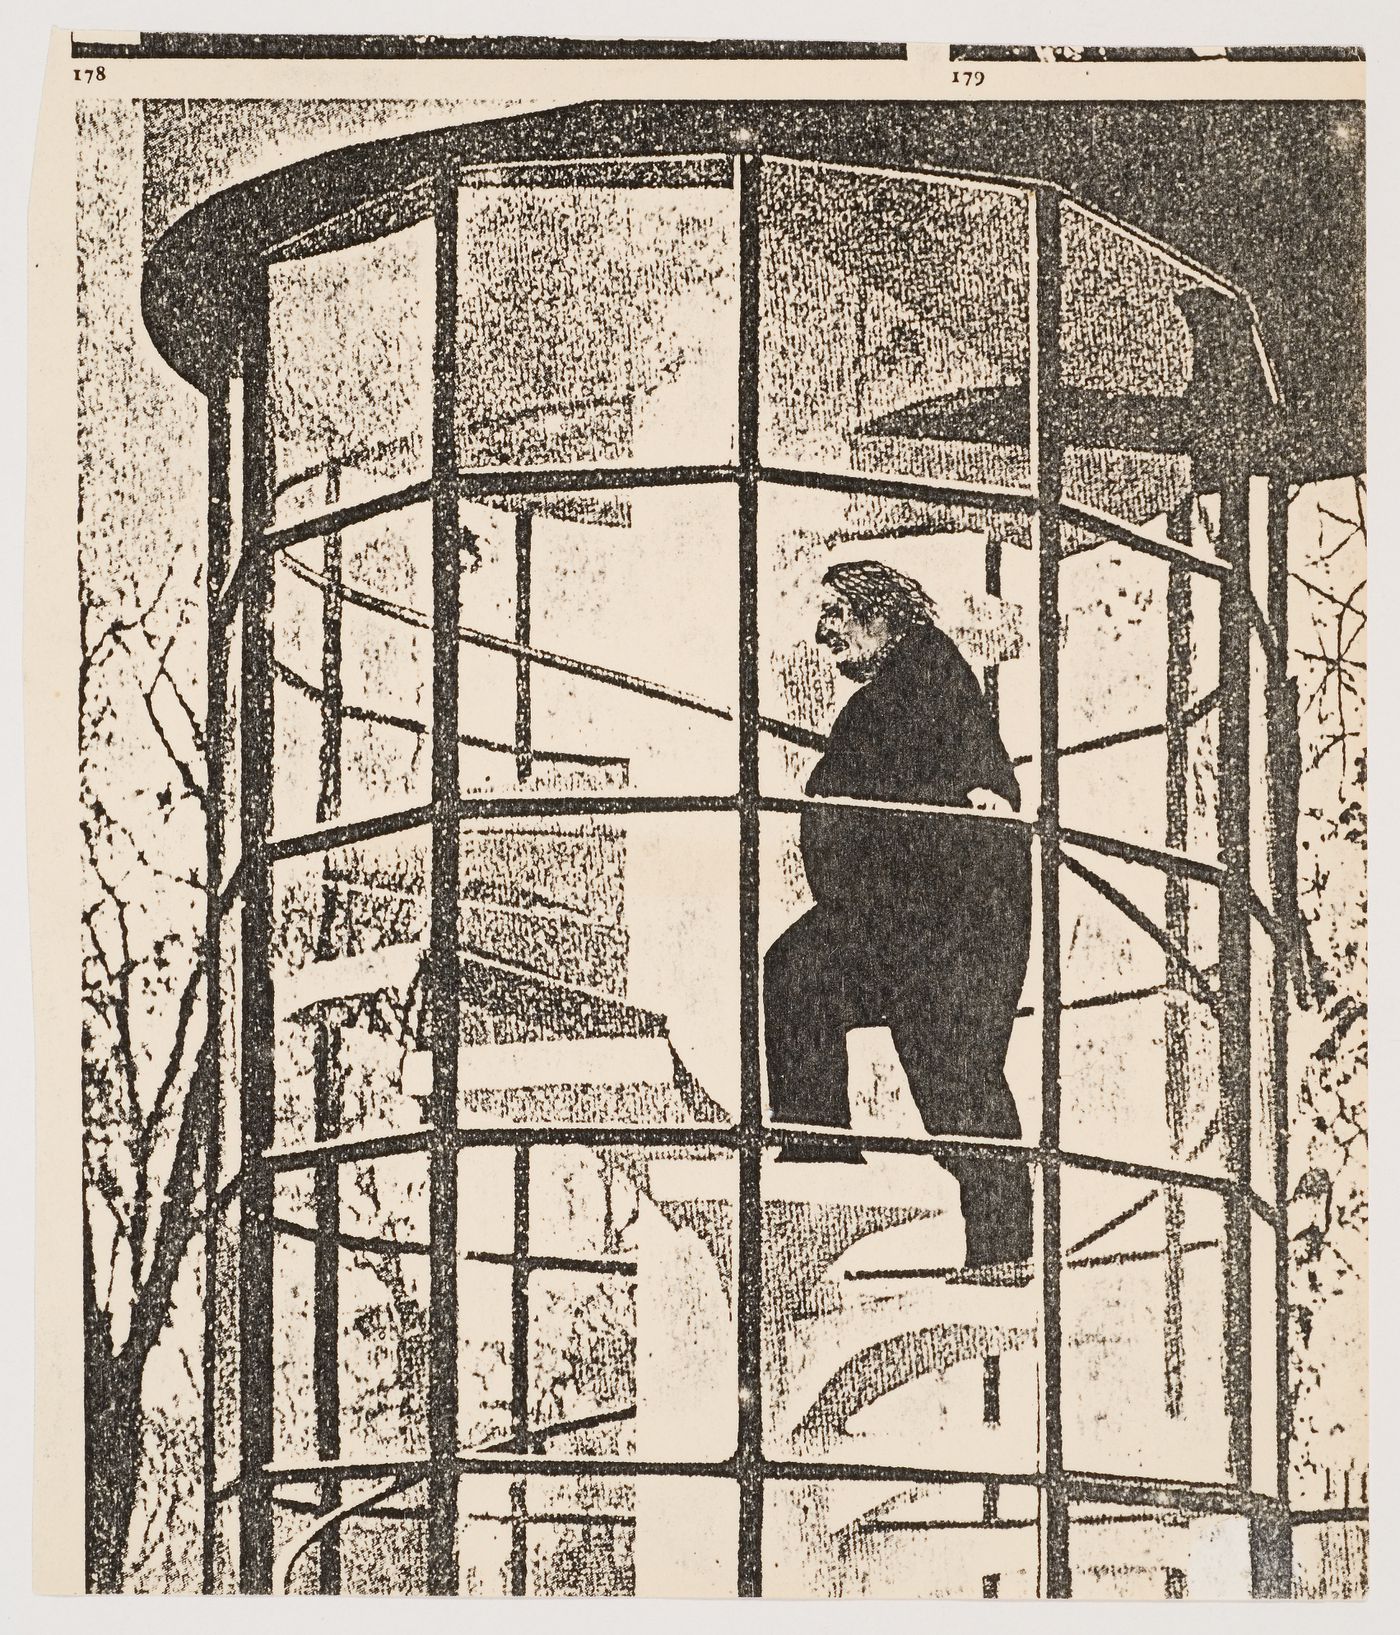 Clipping of a view of James Stirling on the spiral staircase of Leicester University Engineering Building